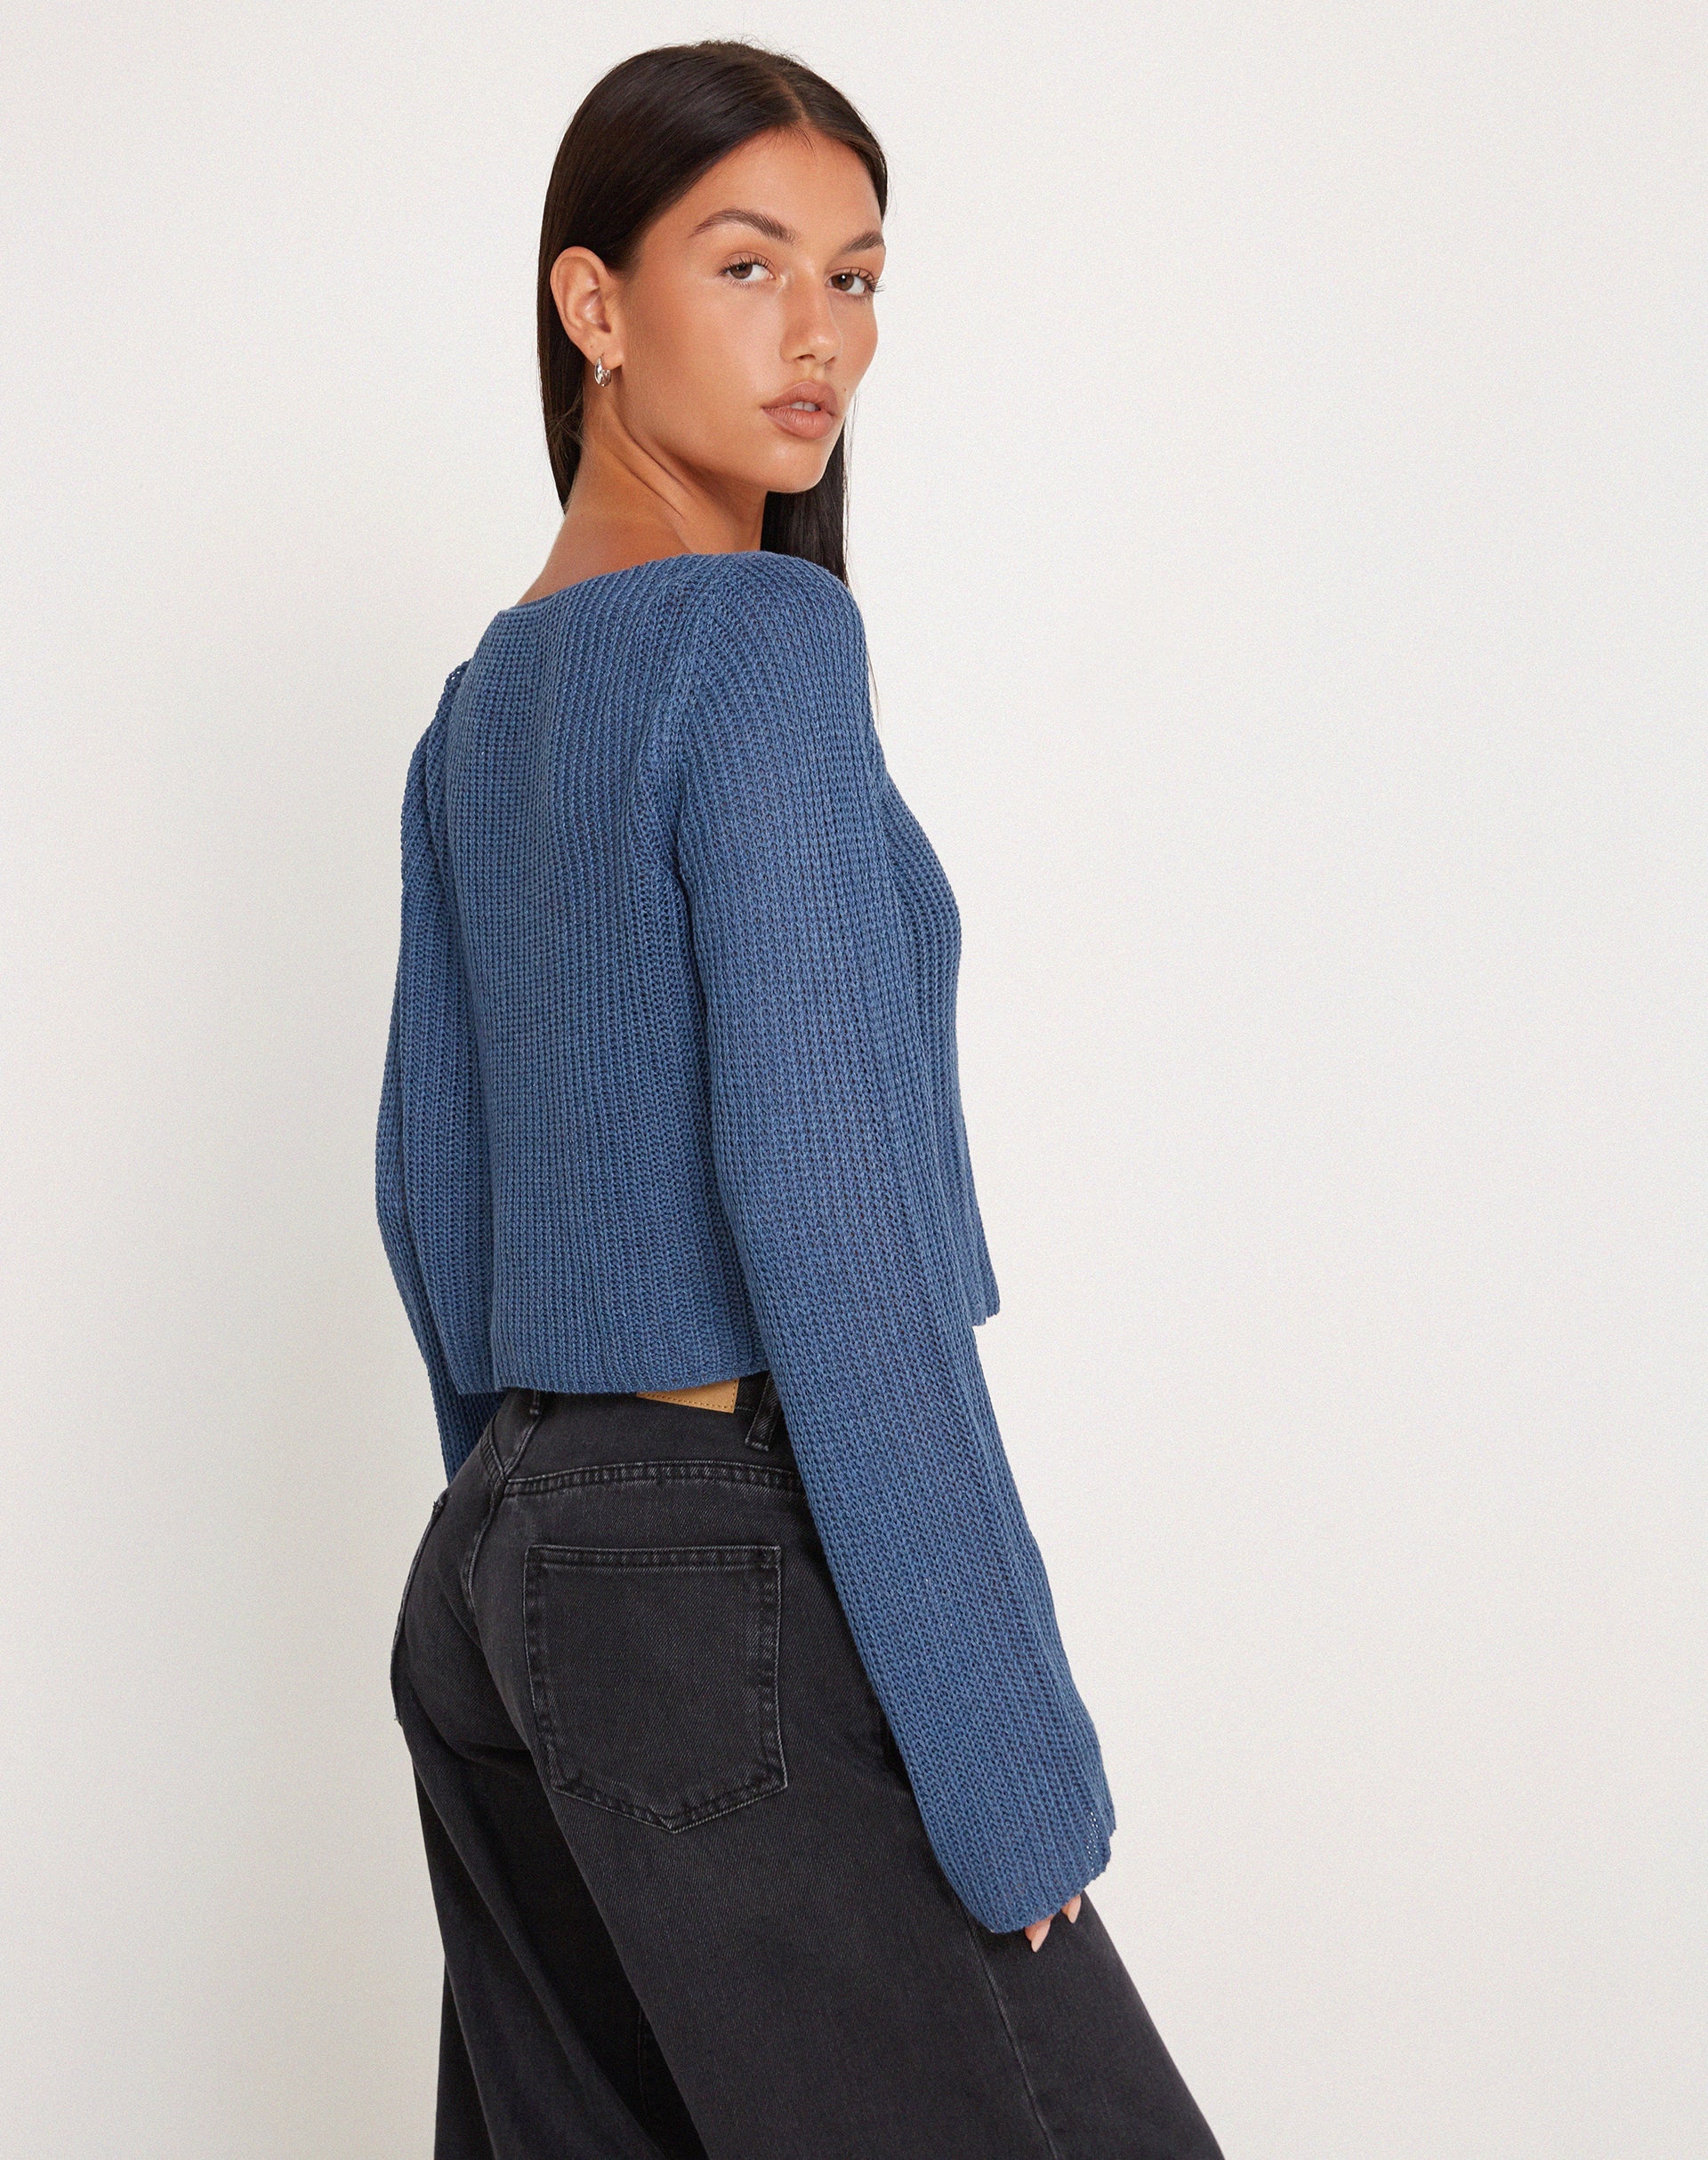 image of Kazayo Long Sleeve Knit Top in Midnight Blue